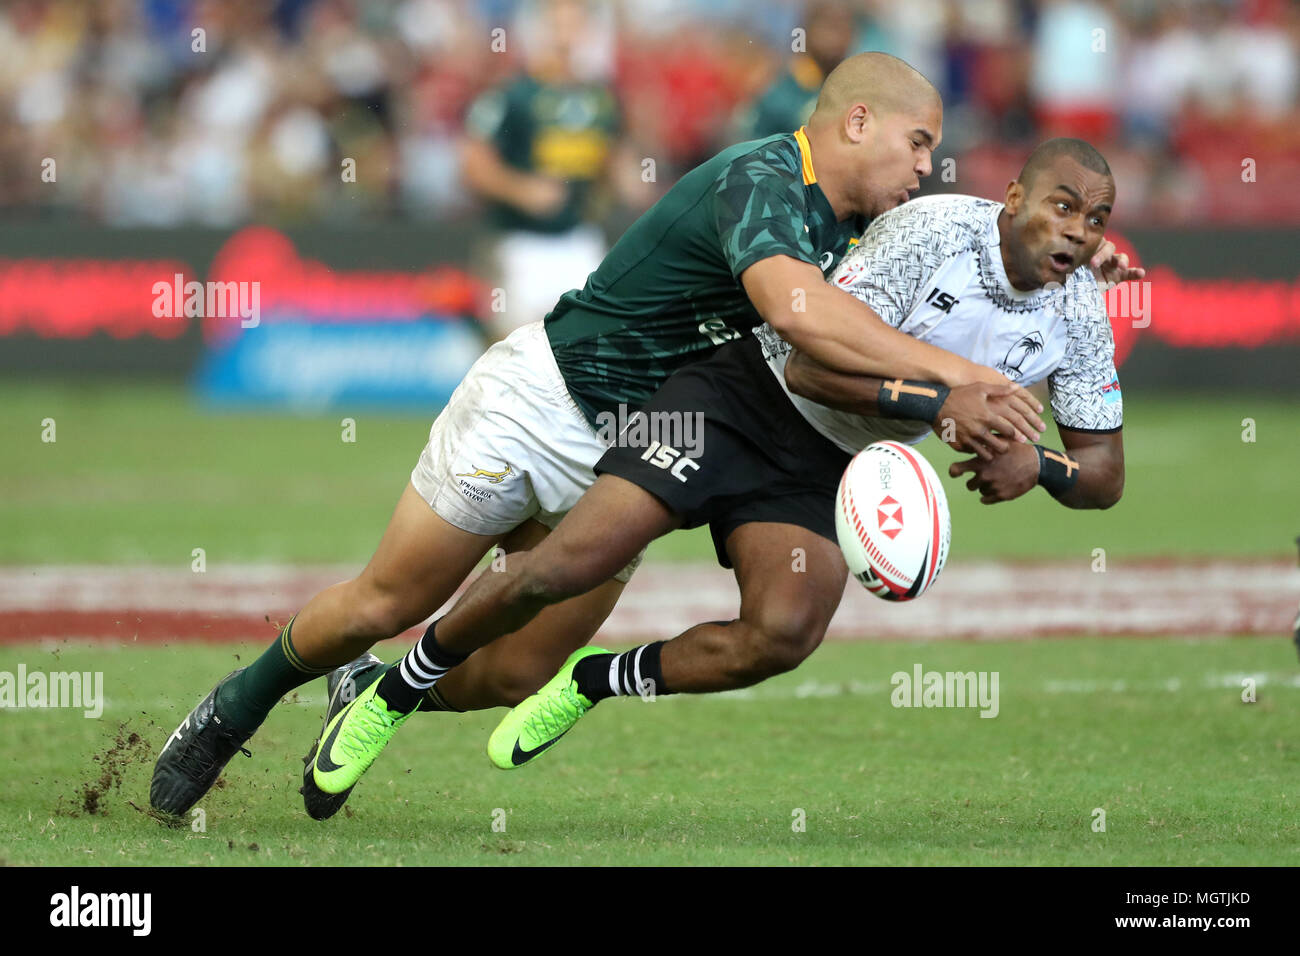 Singapore. 29th Apr, 2018. Alasio Sovita Naduva of Fiji (right) is tackled by Zain Davids of South Africa during the Cup Semi Final match between Fiji and South Africa at the Rugby Sevens tournament at the National Stadium. Singapore. Credit: Paul Miller/ZUMA Wire/Alamy Live News Stock Photo